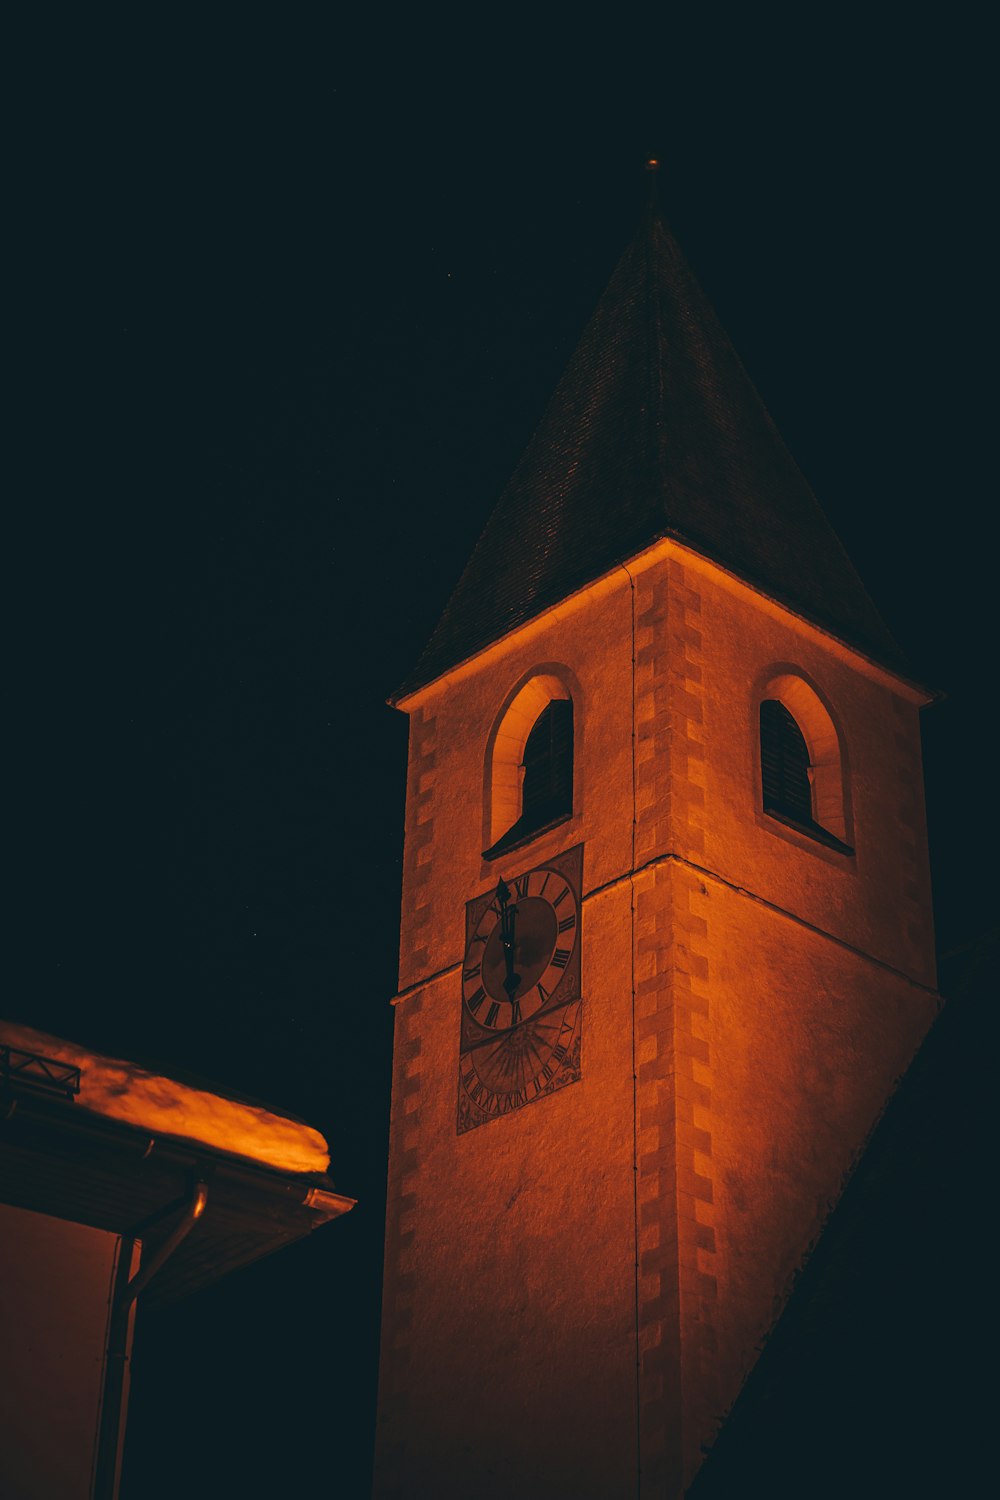 a clock tower lit up at night